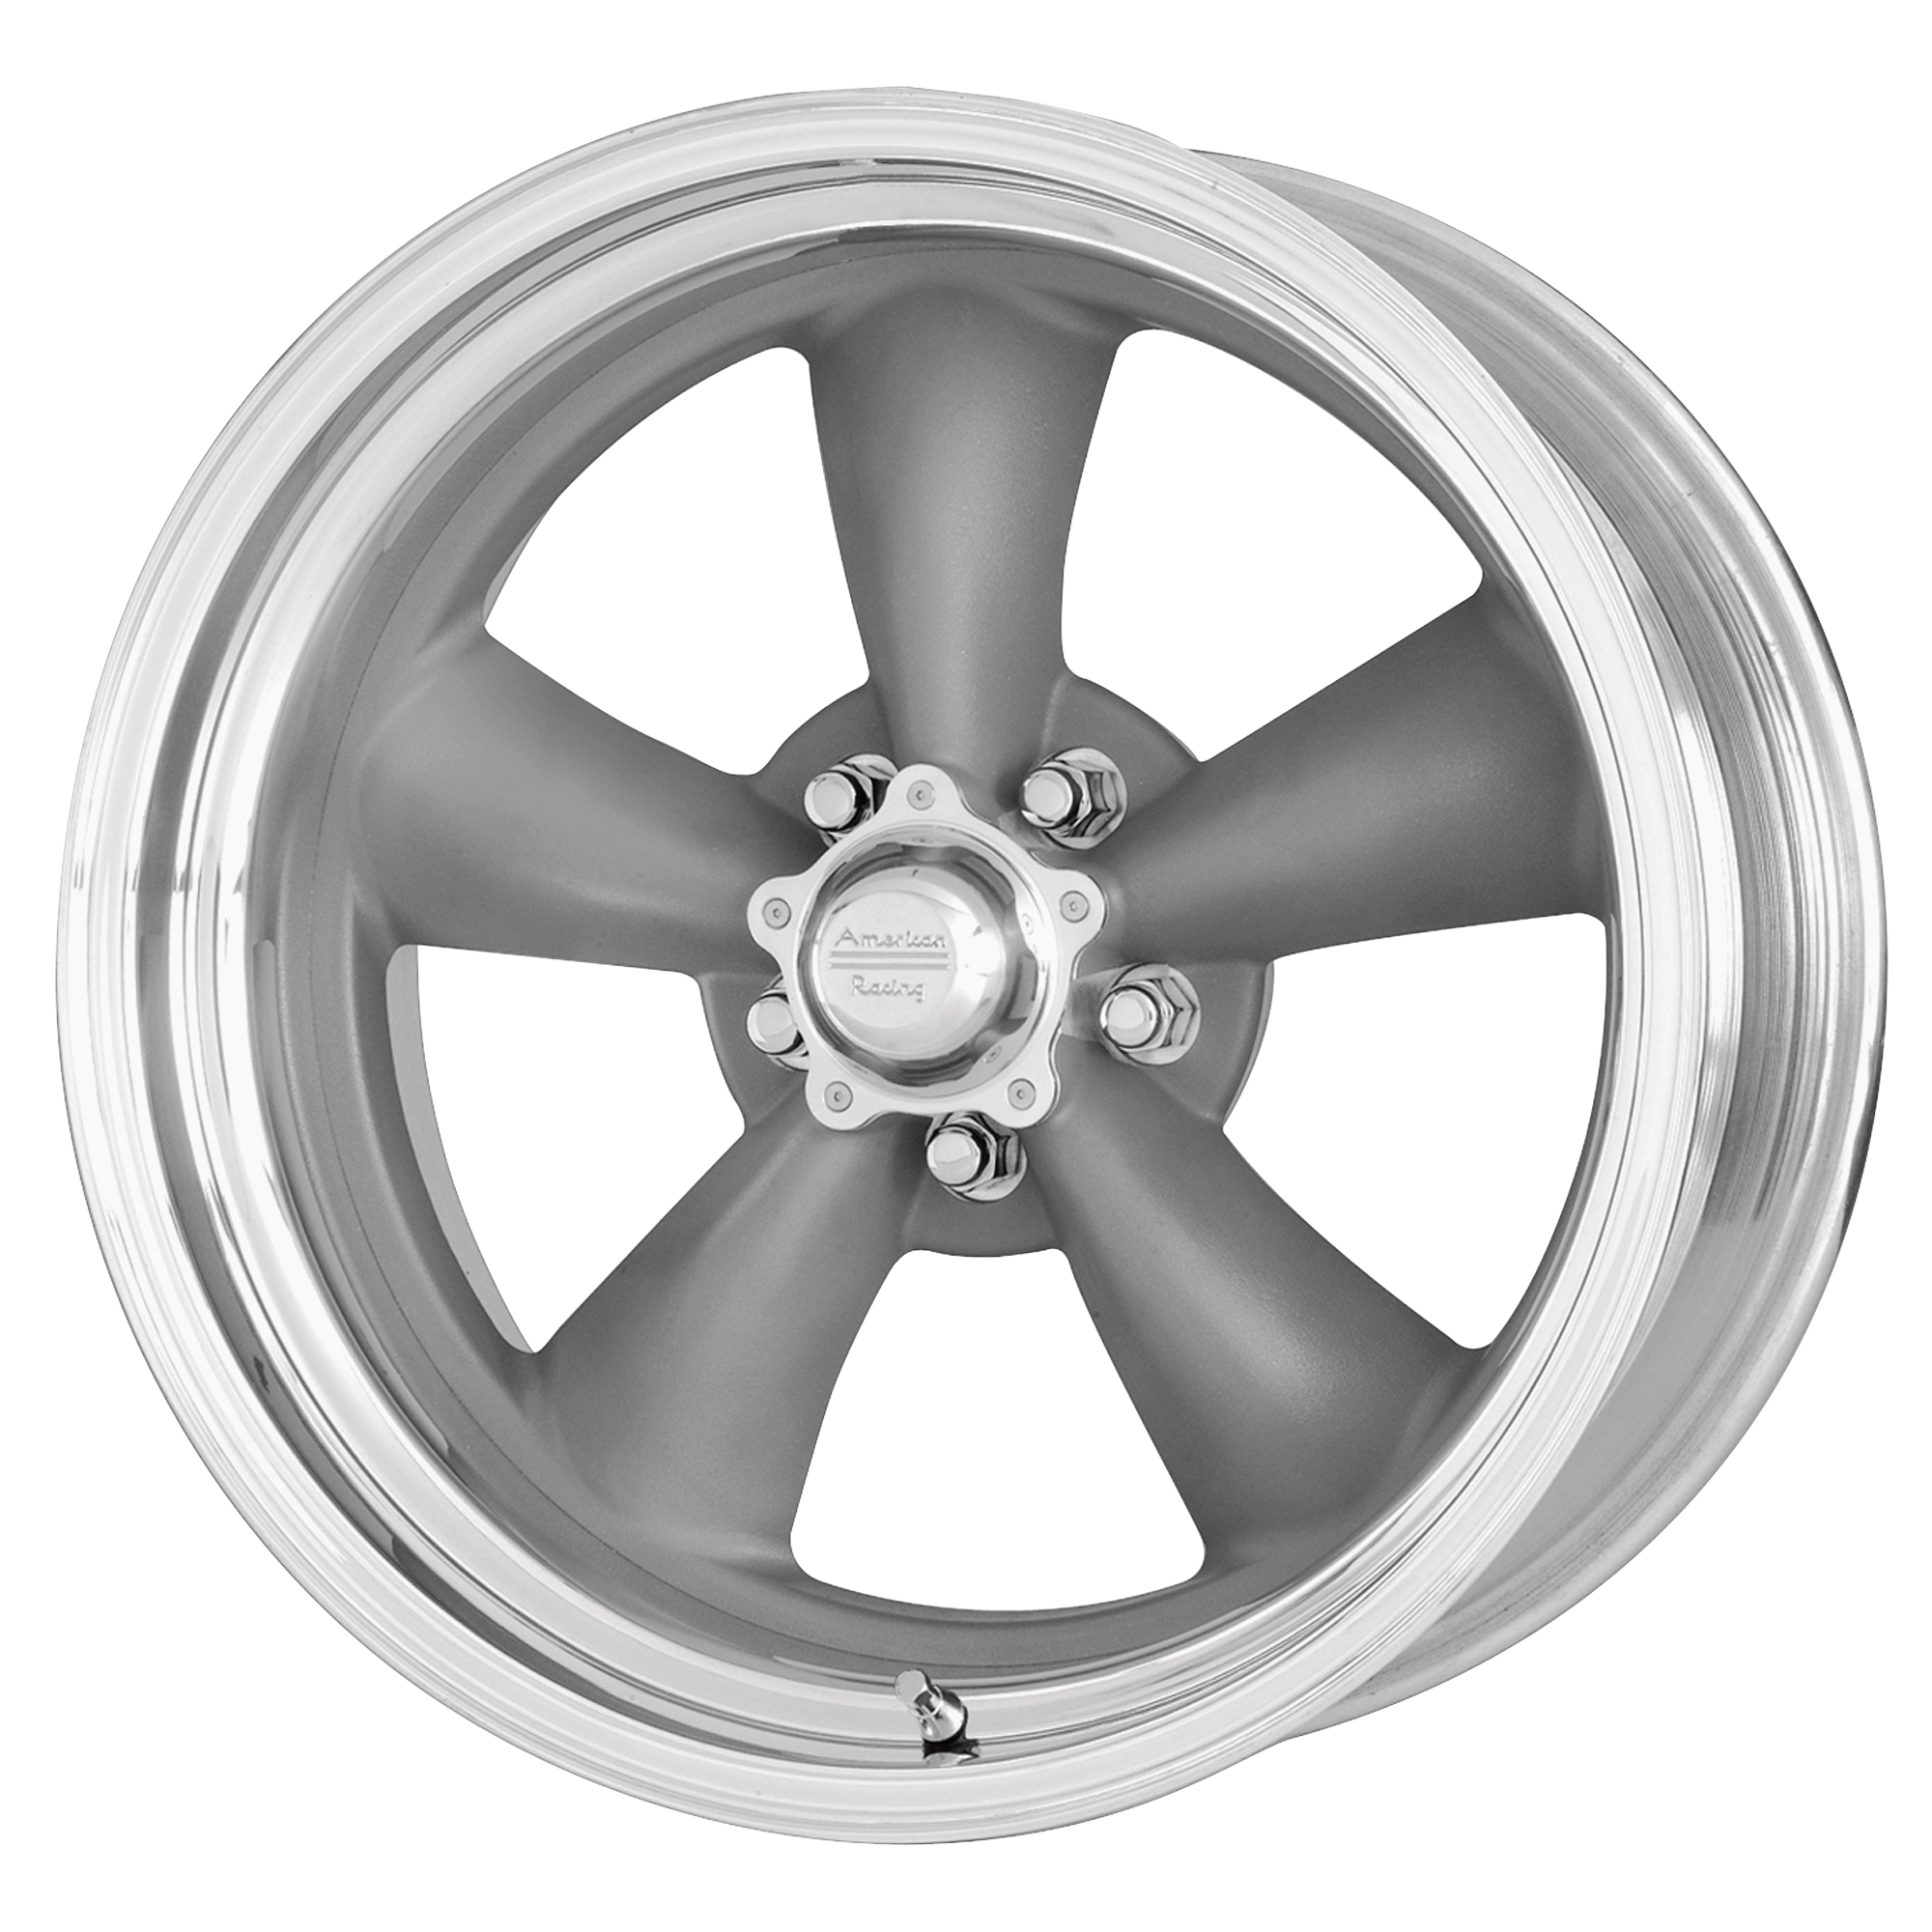 CLASSIC TORQ THRUST II ONE PIECE 15x8 5x120.65 MAG GRAY W/ MACHINED LIP (-18 mm) - Tires and Engine Performance